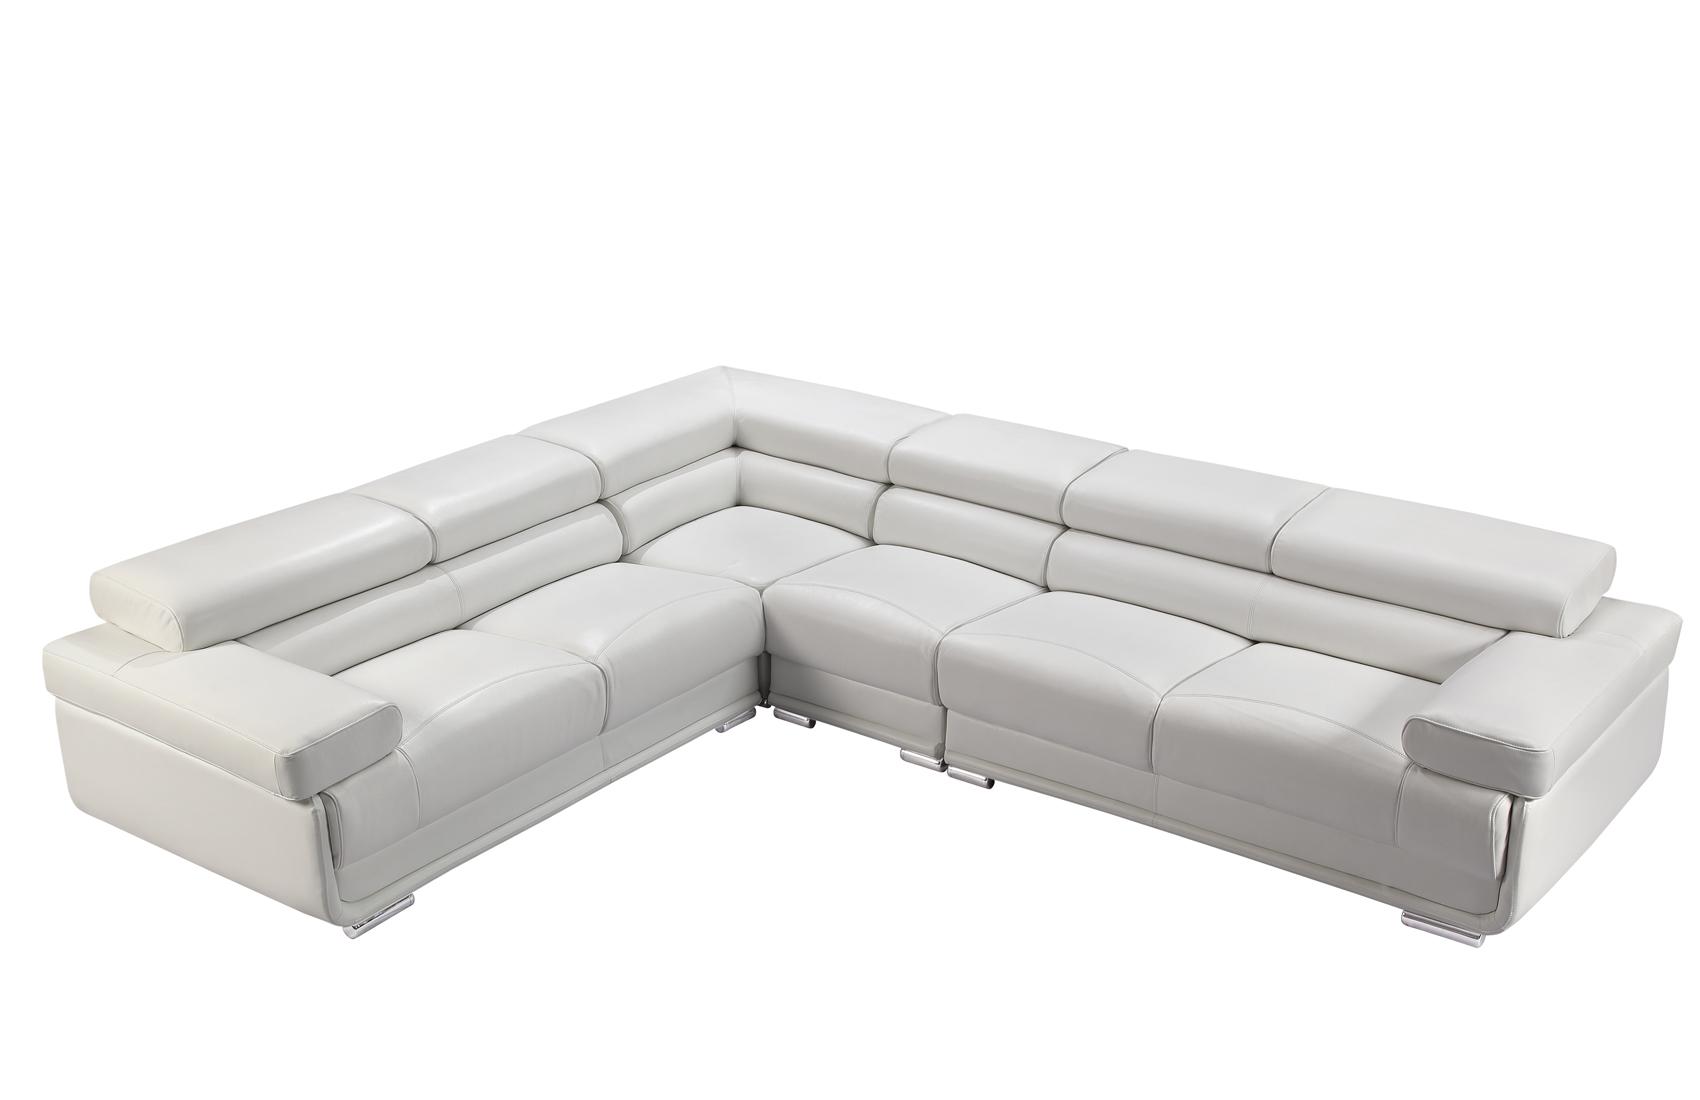 Contemporary, Modern Sectional Sofa 2119 2119SECTIONALWHIITE in White Leather